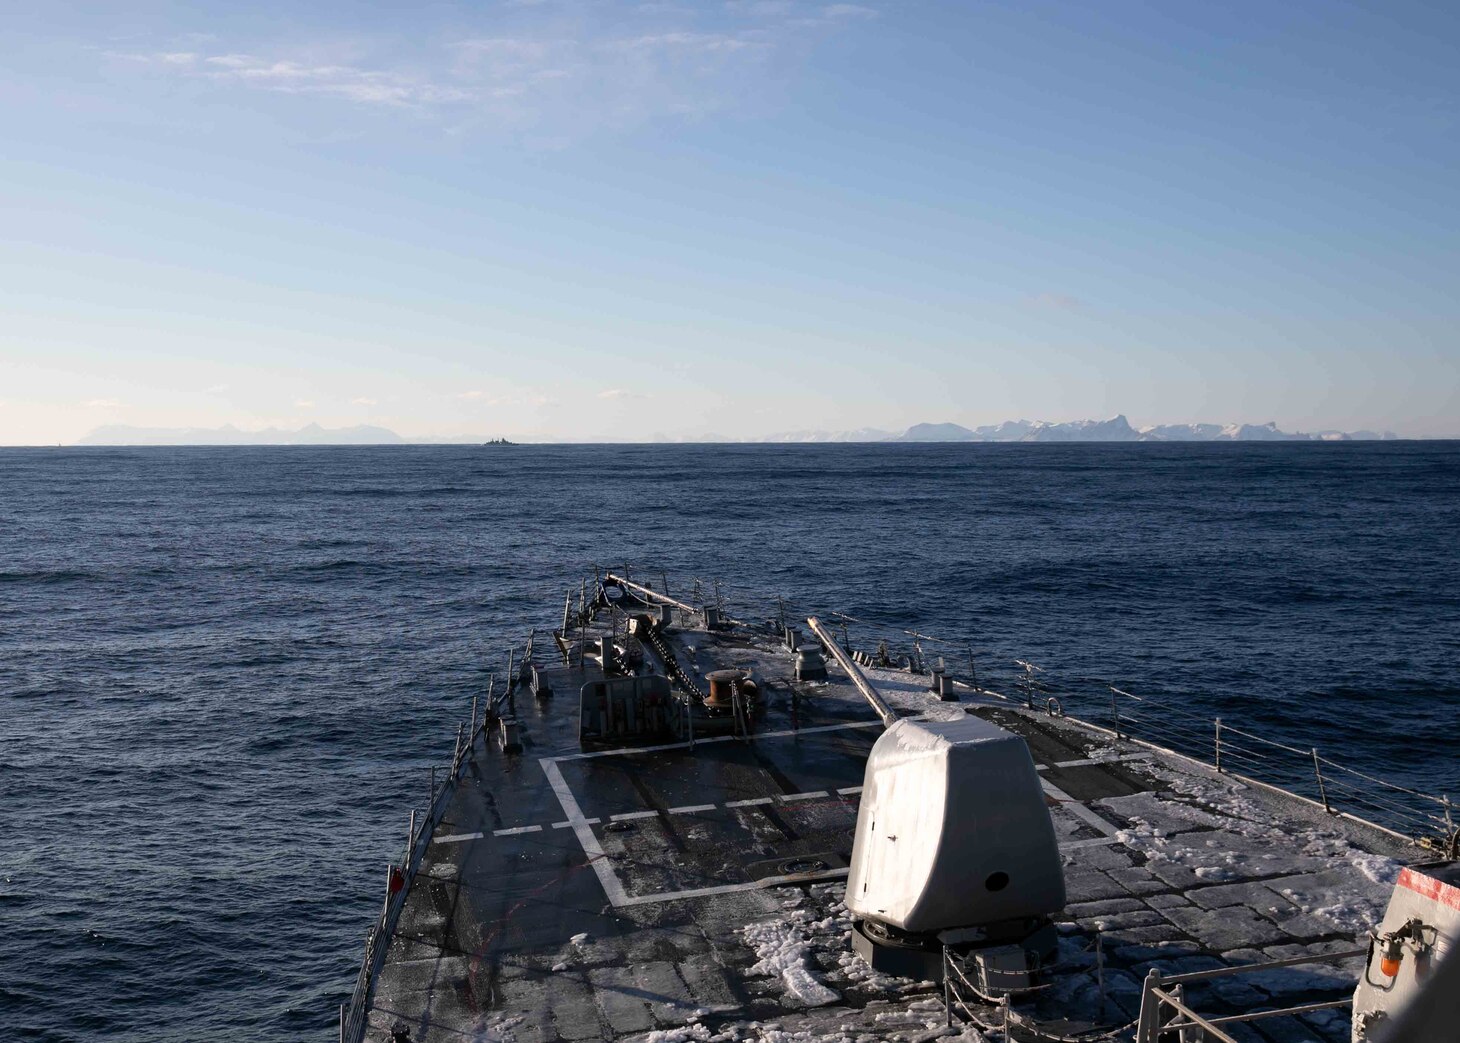 (March 8, 2023) The Arleigh Burke-class guided-missile destroyer USS Arleigh Burke (DDG 51) participates in exercise Joint Warrior 23-1 with other NATO allies in the North Sea, March 8, 2023. Arleigh Burke is on a scheduled deployment in the U.S. Naval Forces Europe area of operations, employed by U.S. Sixth Fleet to defend U.S., allied and partner interests.